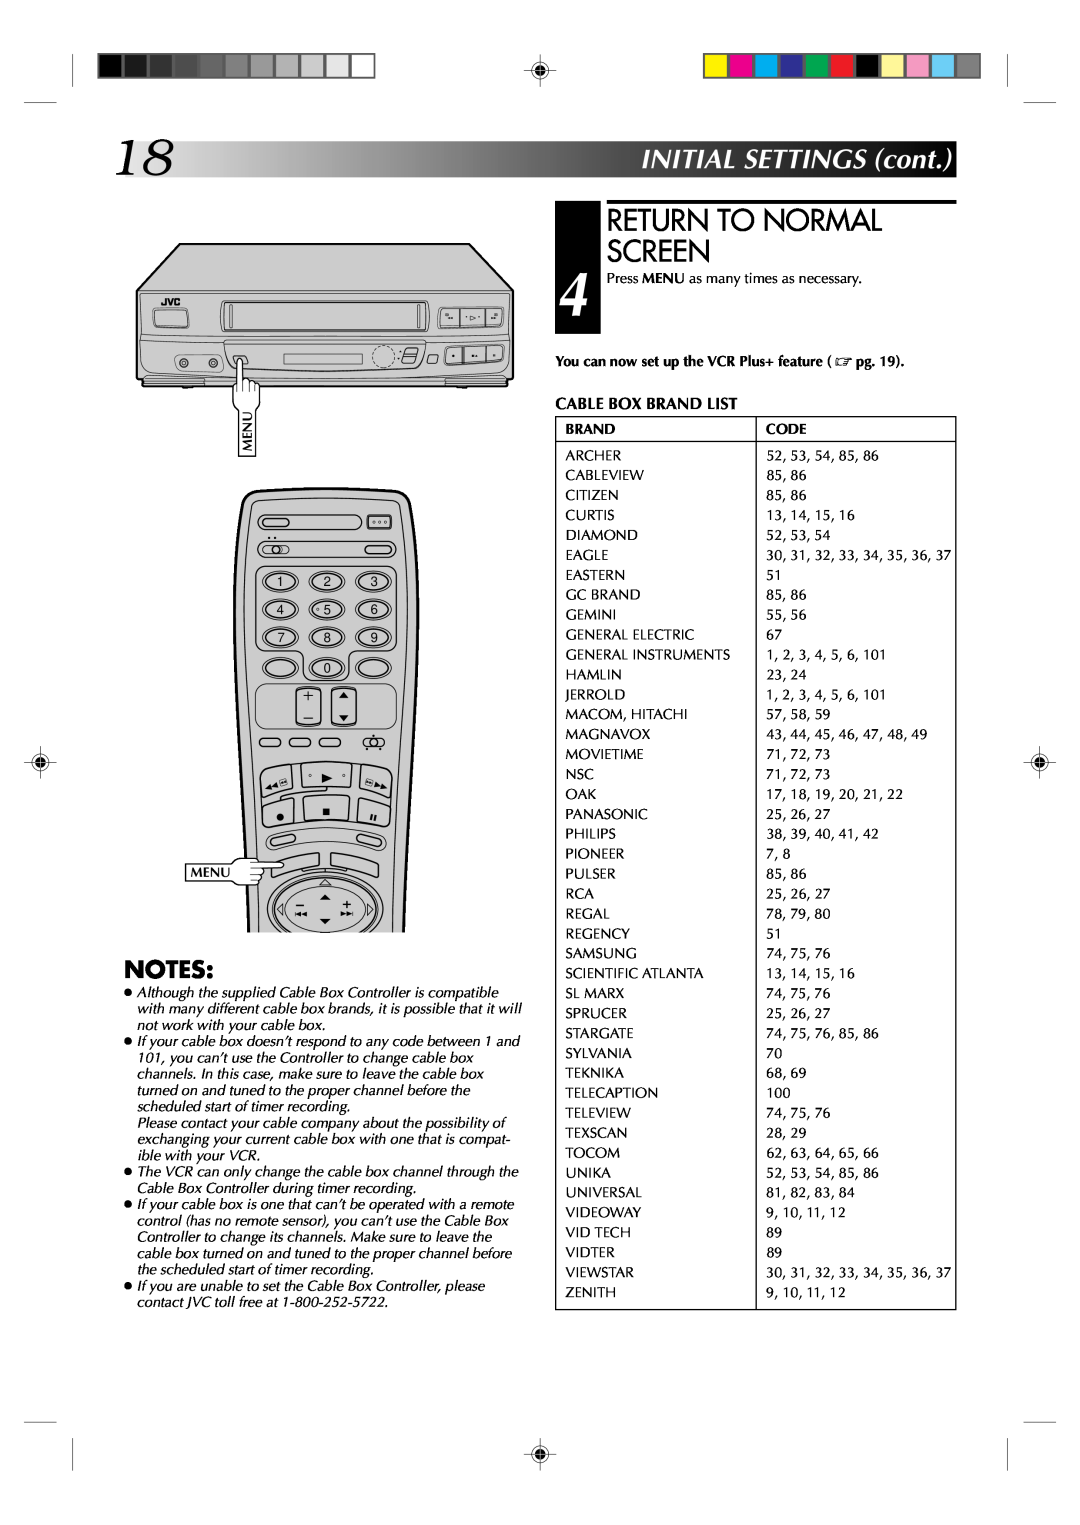 JVC HR-VP434U 18INITIALSETTINGScont, Return To Normal Screen, You can now set up the VCR Plus+ feature pg, Brand, Code 